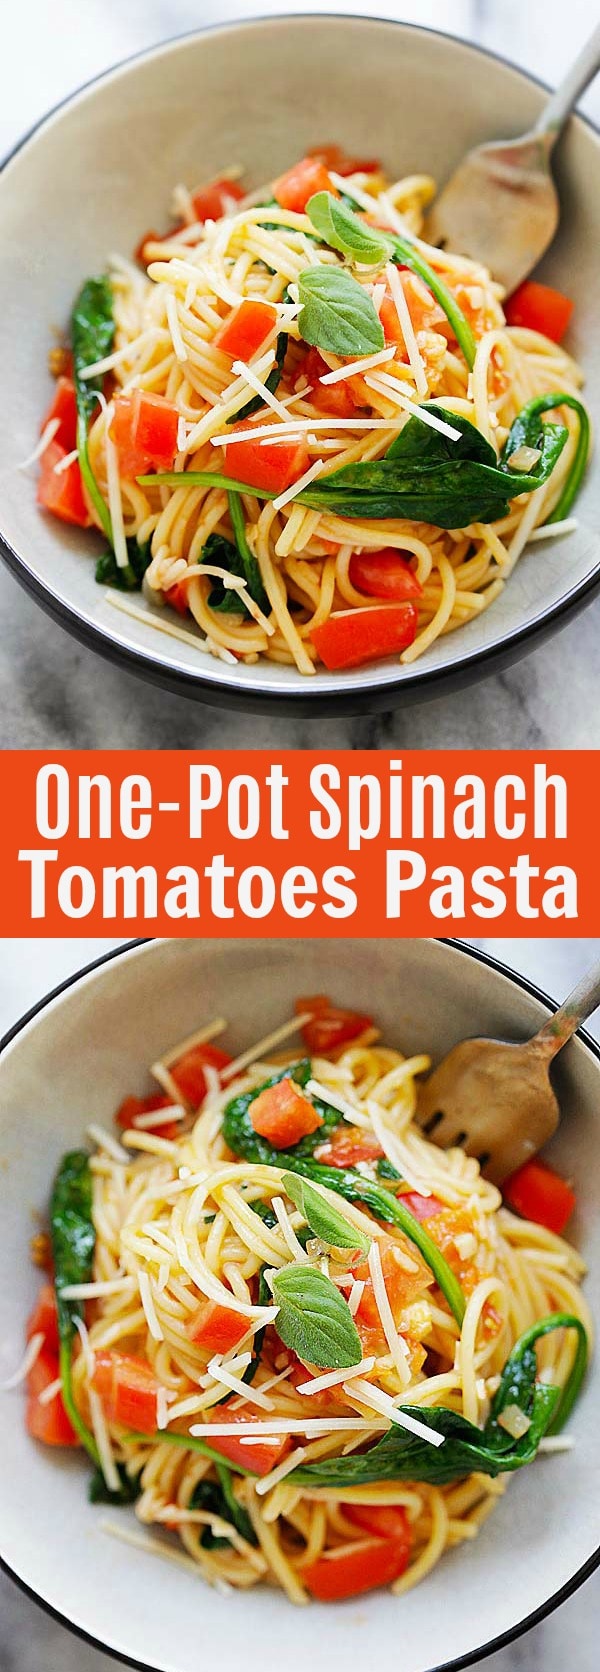 One-Pot Pasta with Spinach and Tomatoes - crazy delicious pasta with spinach and tomatoes. Everything is made from scratch and cooked in one pot. The best pasta recipe ever | rasamalaysia.com